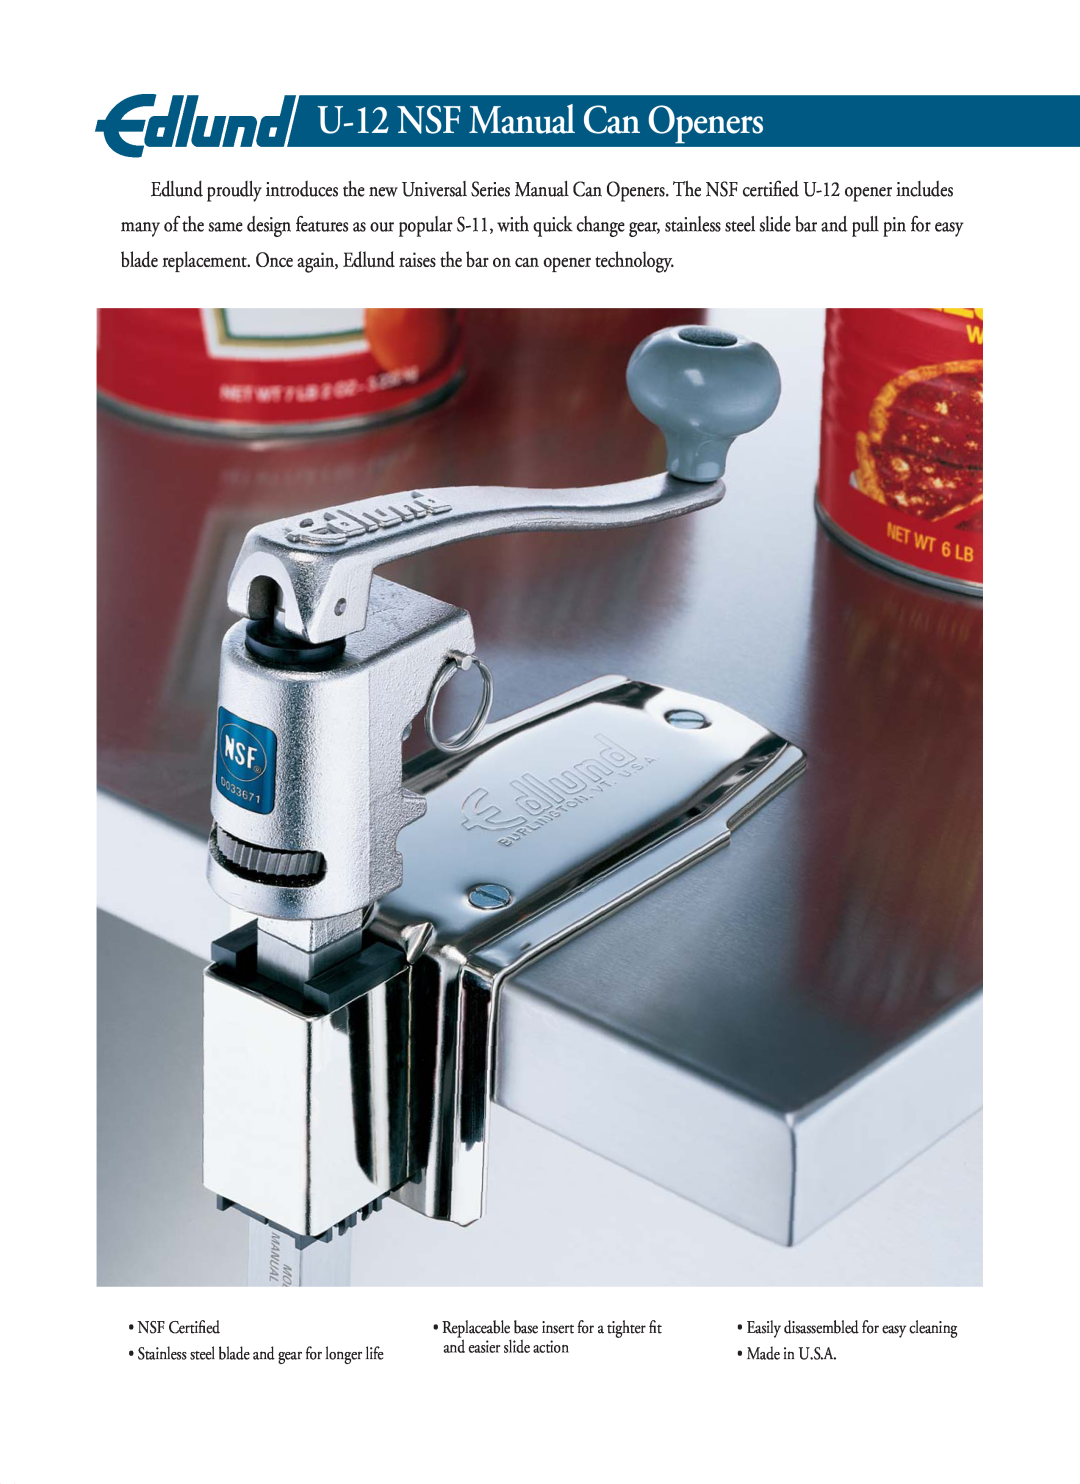 Edlund Company manual U-12 NSF Manual Can Openers, NSF Certiﬁed, Replaceable base insert for a tighter ﬁt 